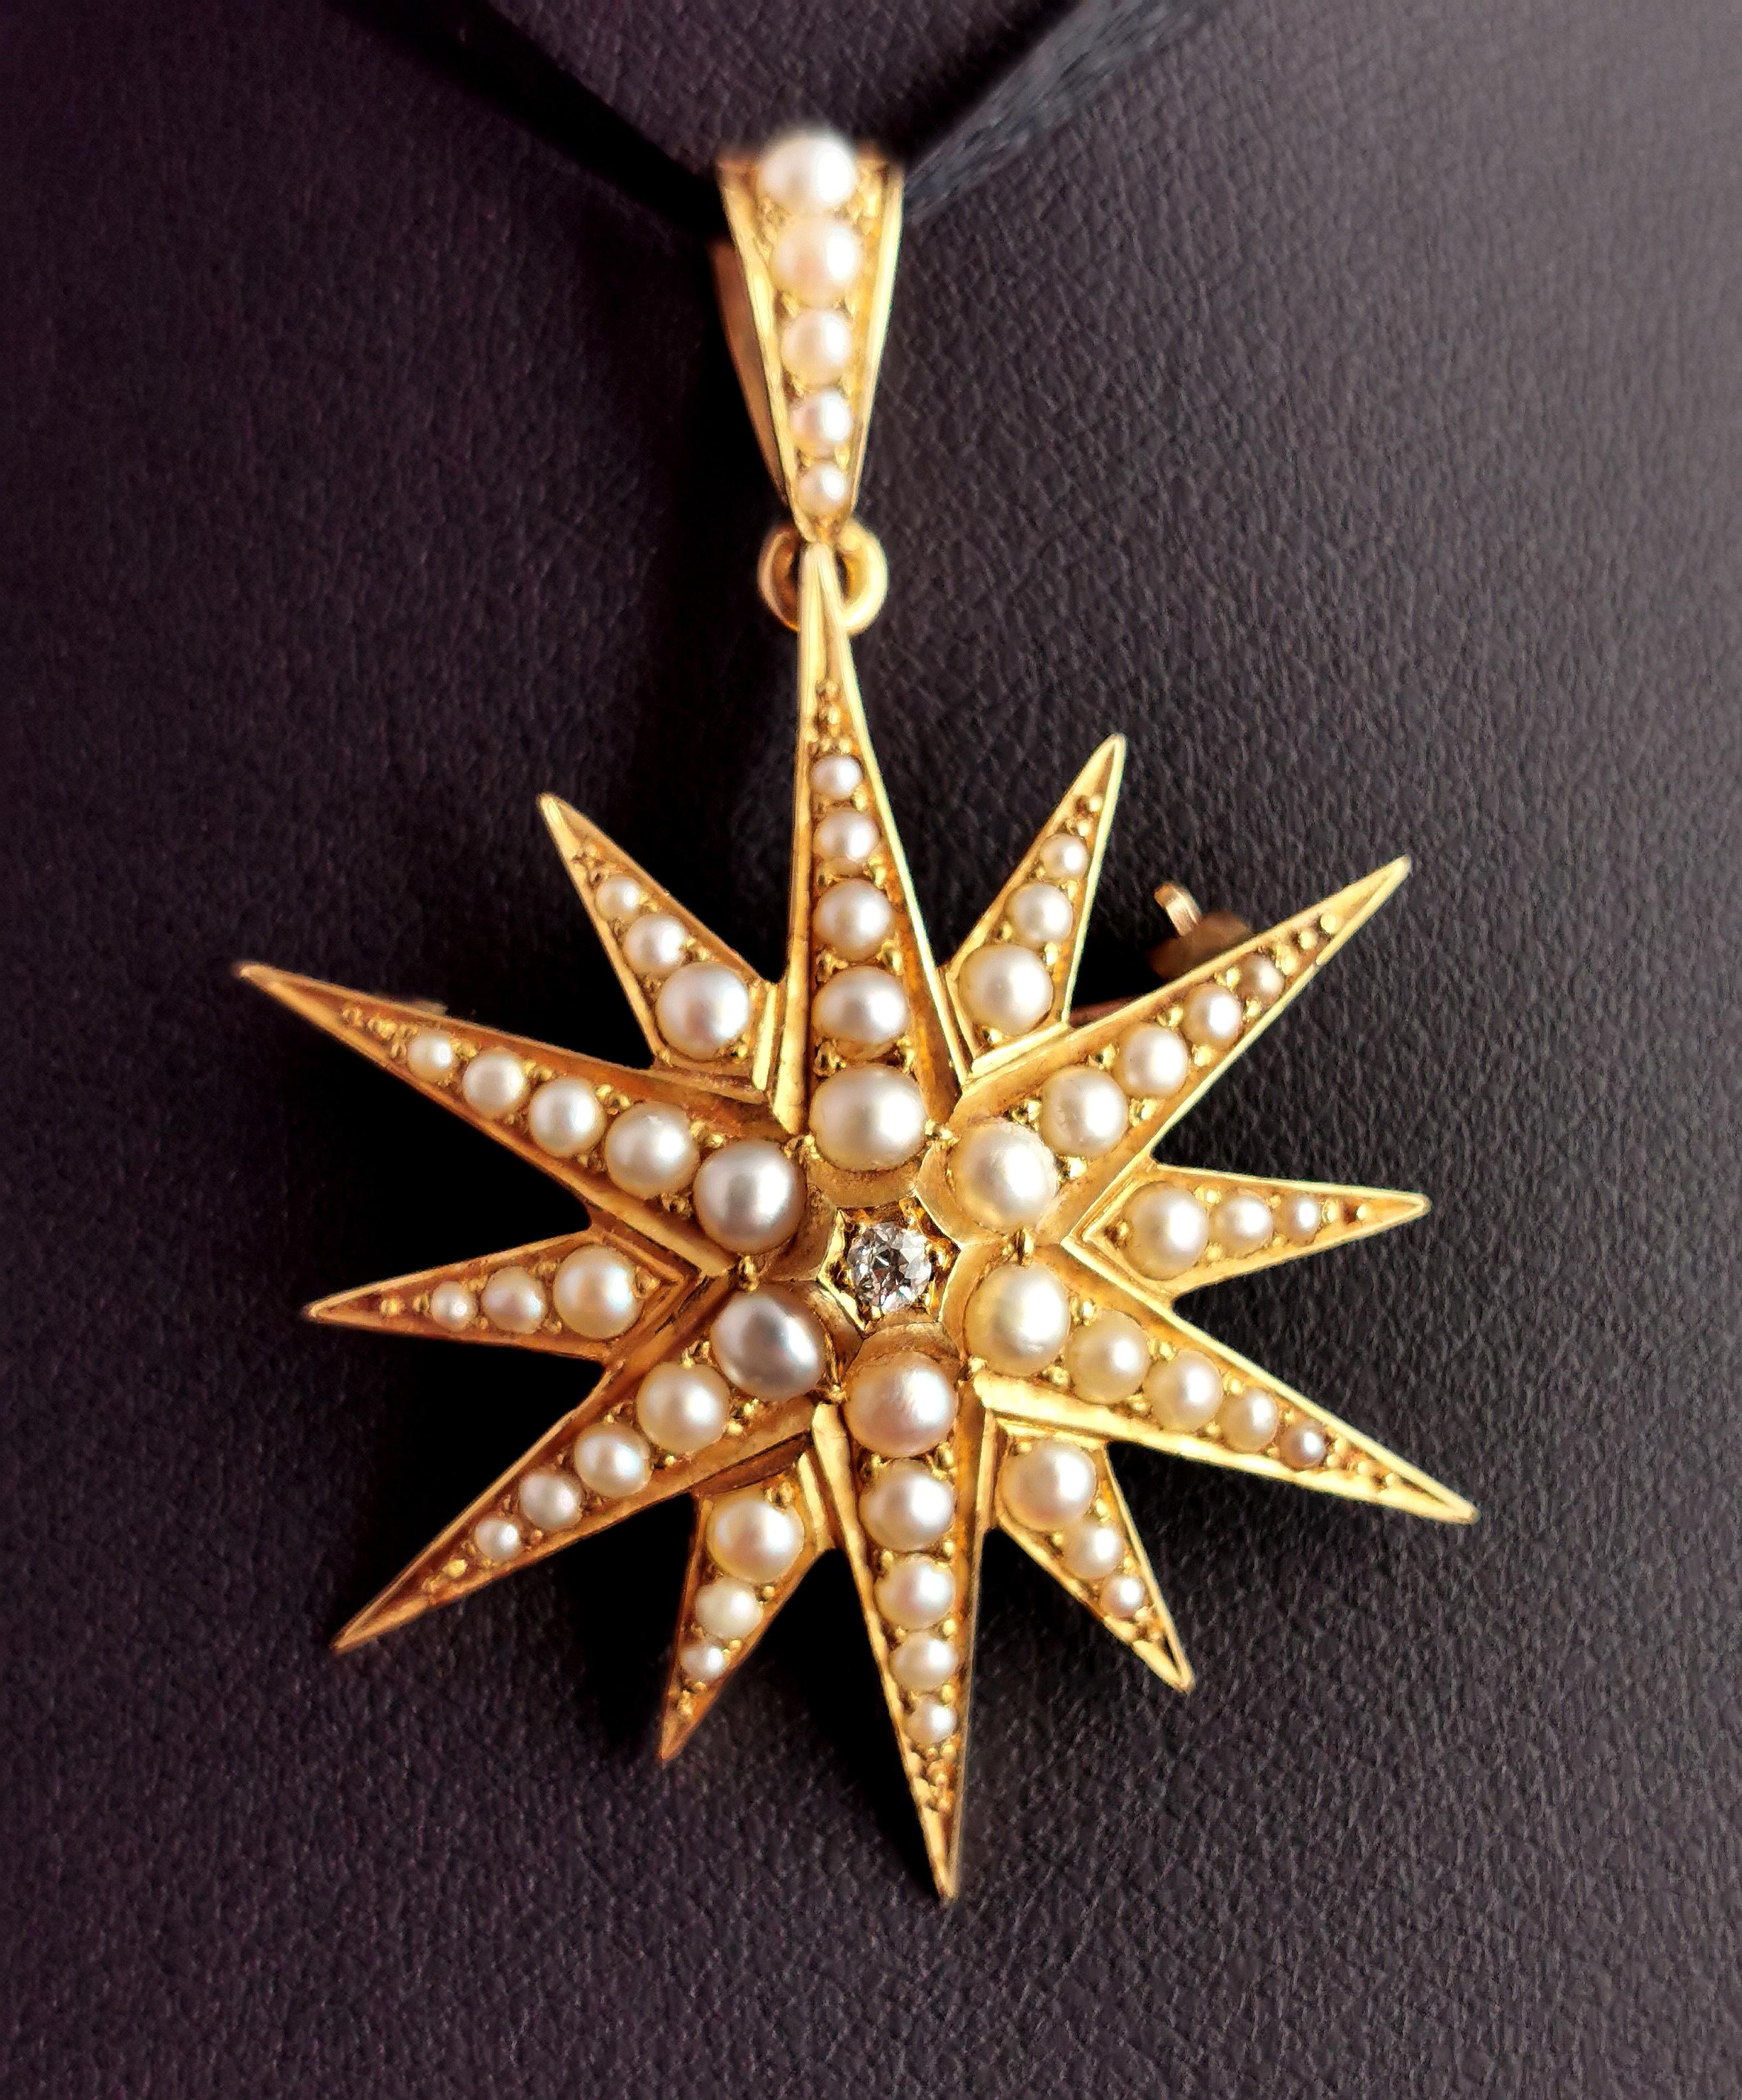 An absolutely stunning Victorian pearl and diamond star pendant brooch.

Such an elegant and timeless design the star has been a popular motif in jewellery for many centuries and the Victorian era saw a huge rise in popularity for all celestial